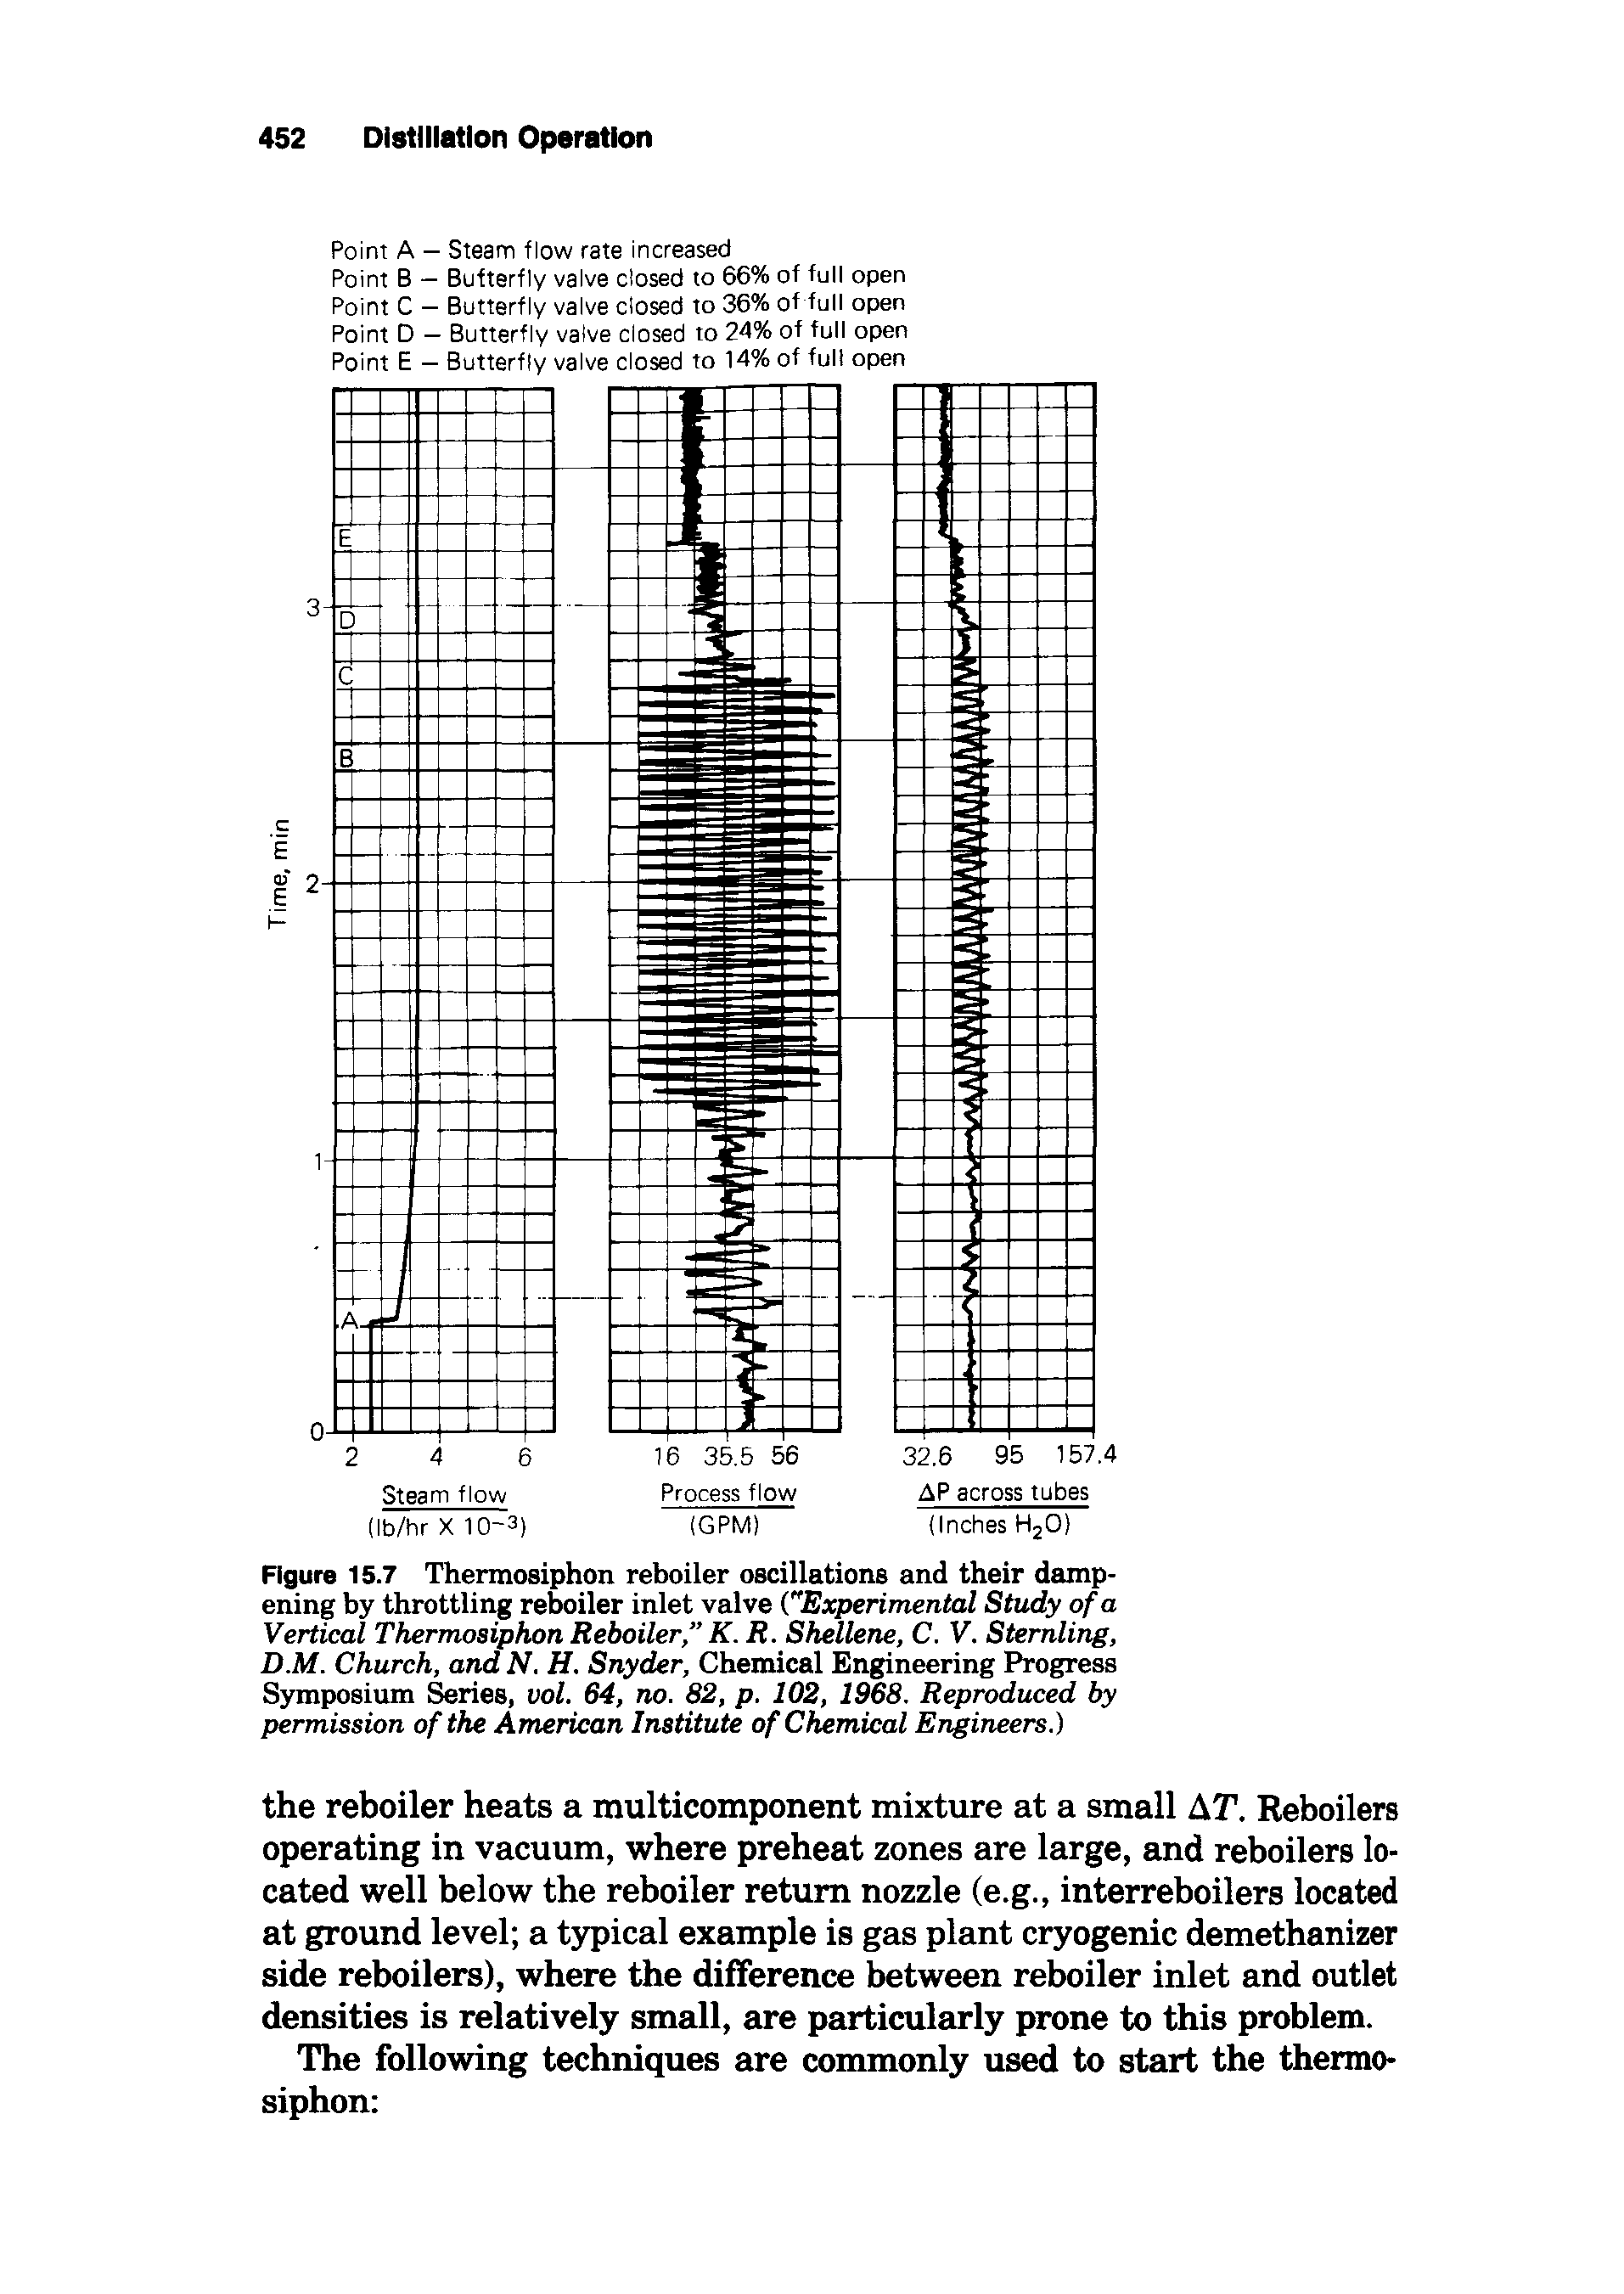 Figure 15.7 Thermosiphon reboiler oscillations and their dampening by throttling reboiler inlet valve ("Experimental Study of a Vertical Thermosiphon Reboiler, K. R. Shellene, C. V. Sternling, DM. Church, and N. H. Snyder, Chemical Engineering Progress Symposium ries, vol. 64, no. 82, p. 102, 1968. Reproduced by permission of the American Institute of Chemical Engineers.)...